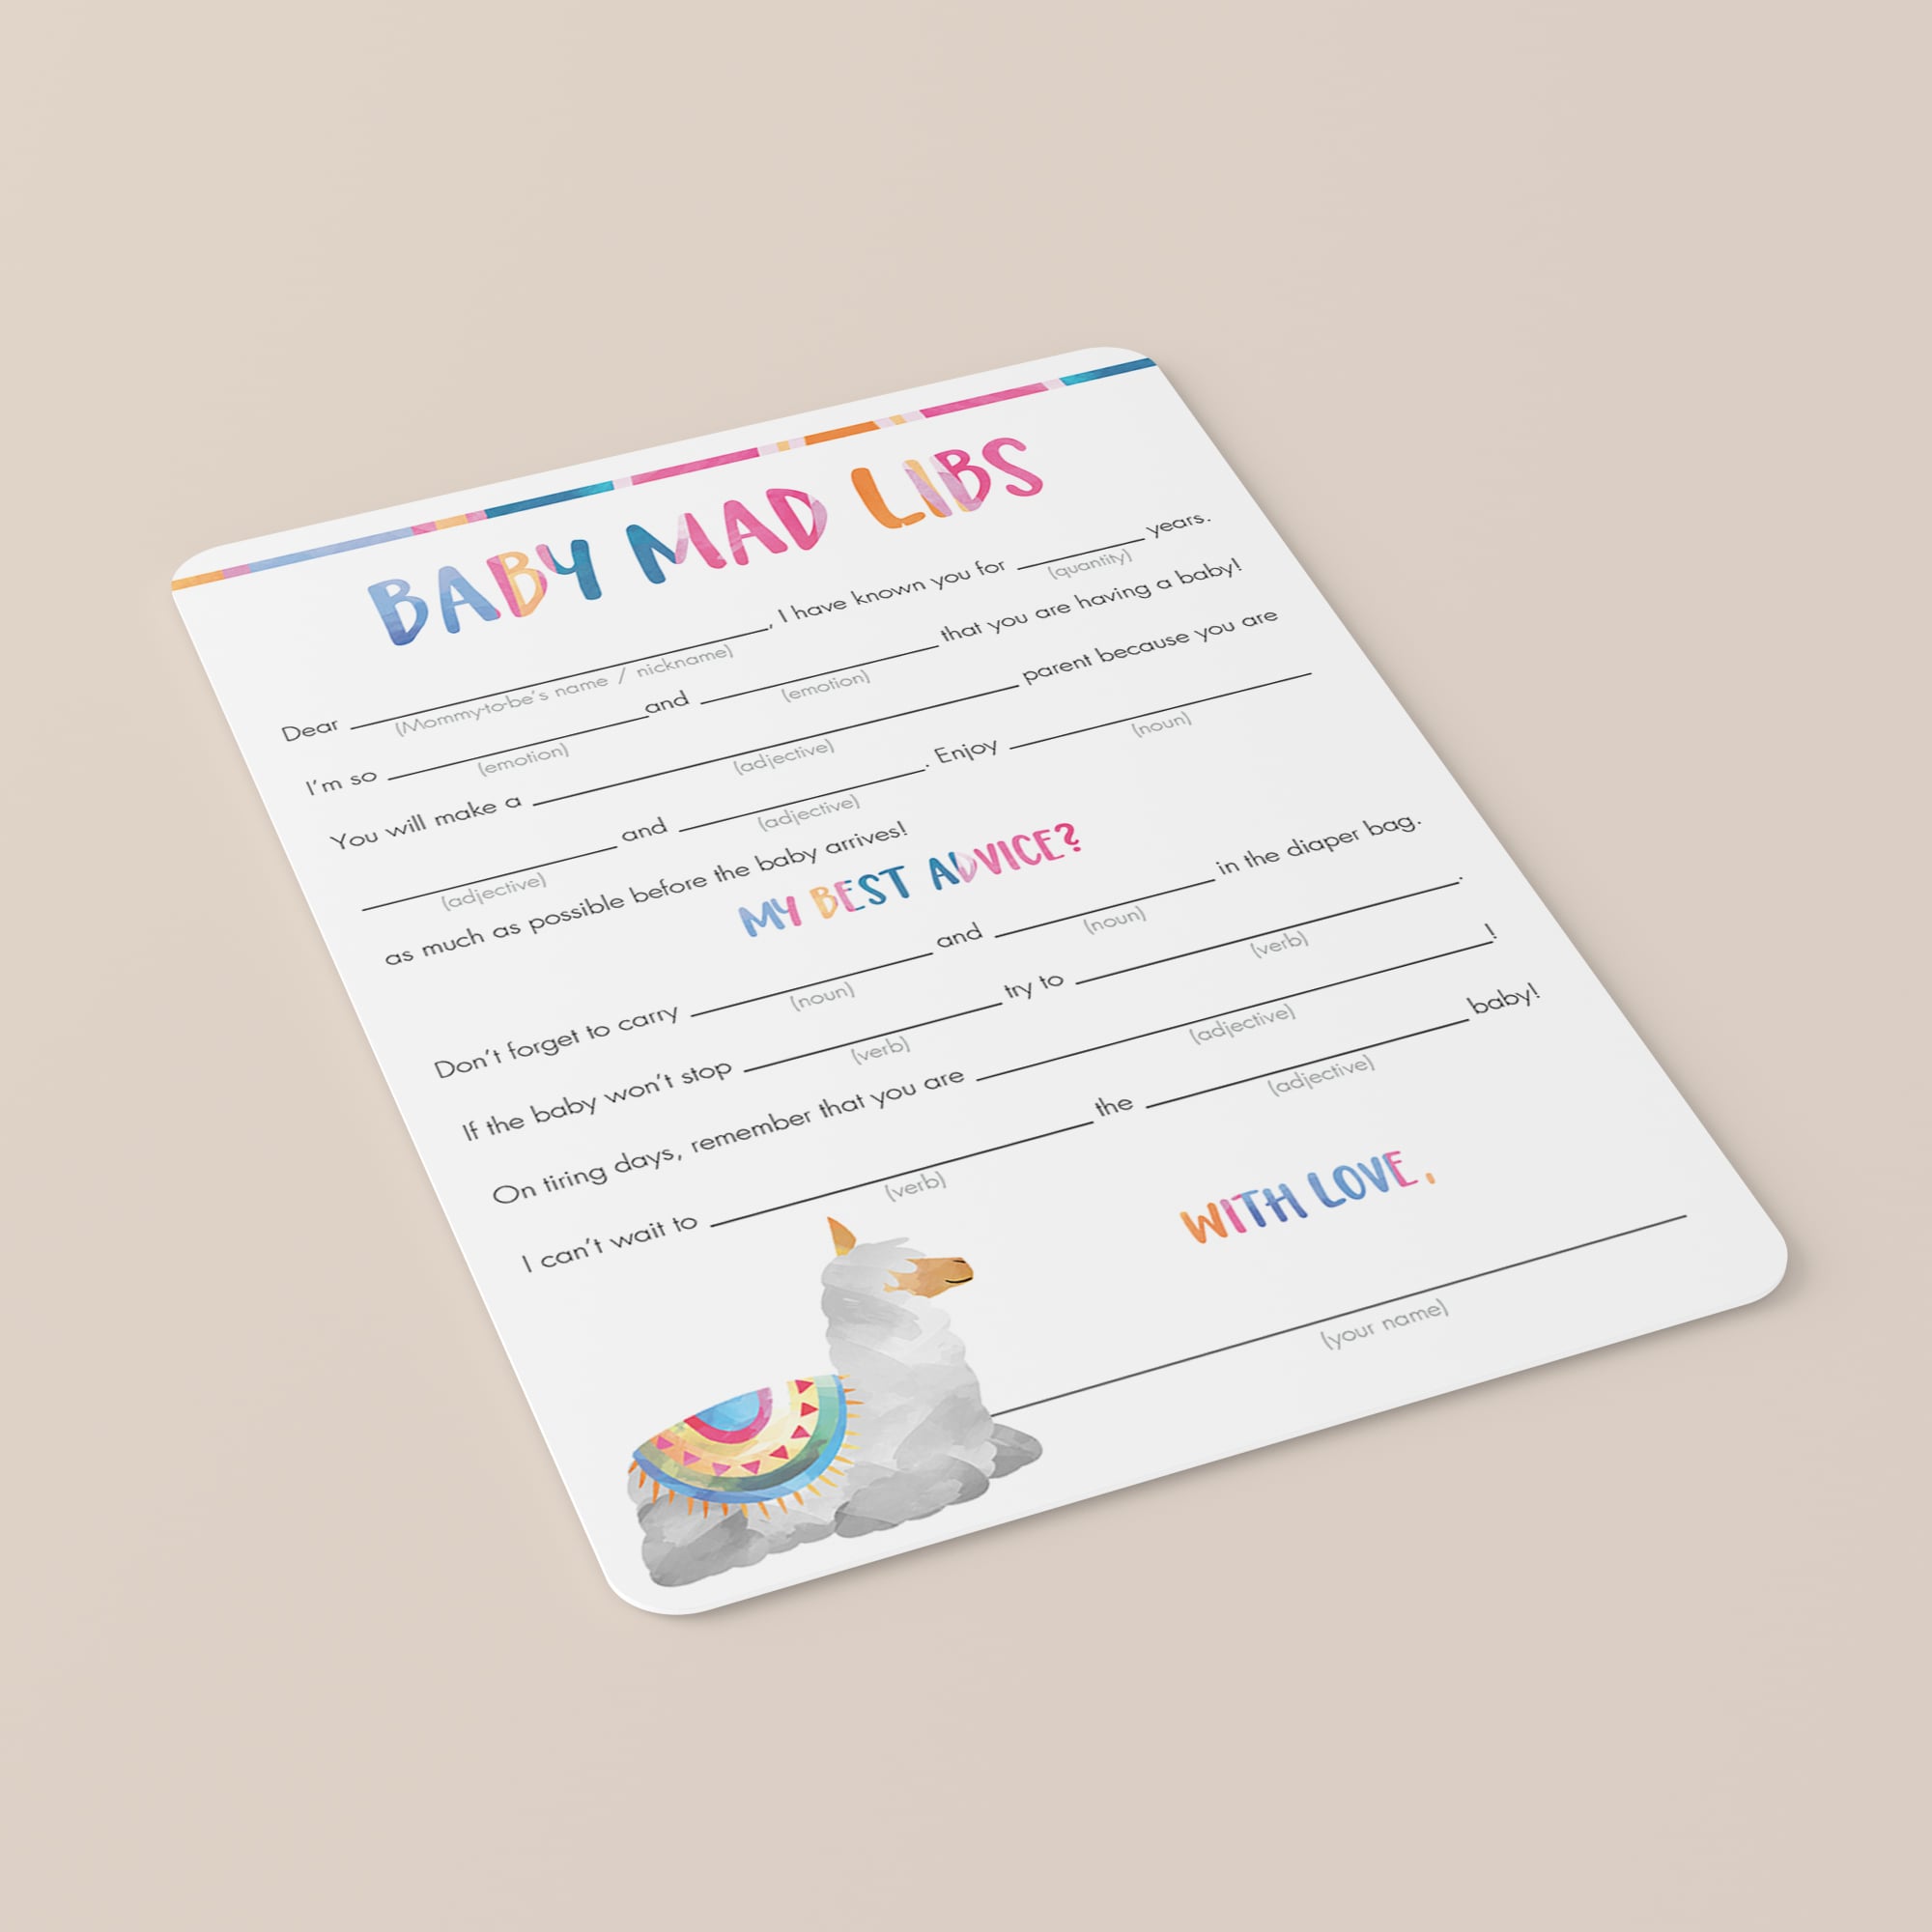 Girl baby shower mad libs fill in the blanks by LittleSizzle